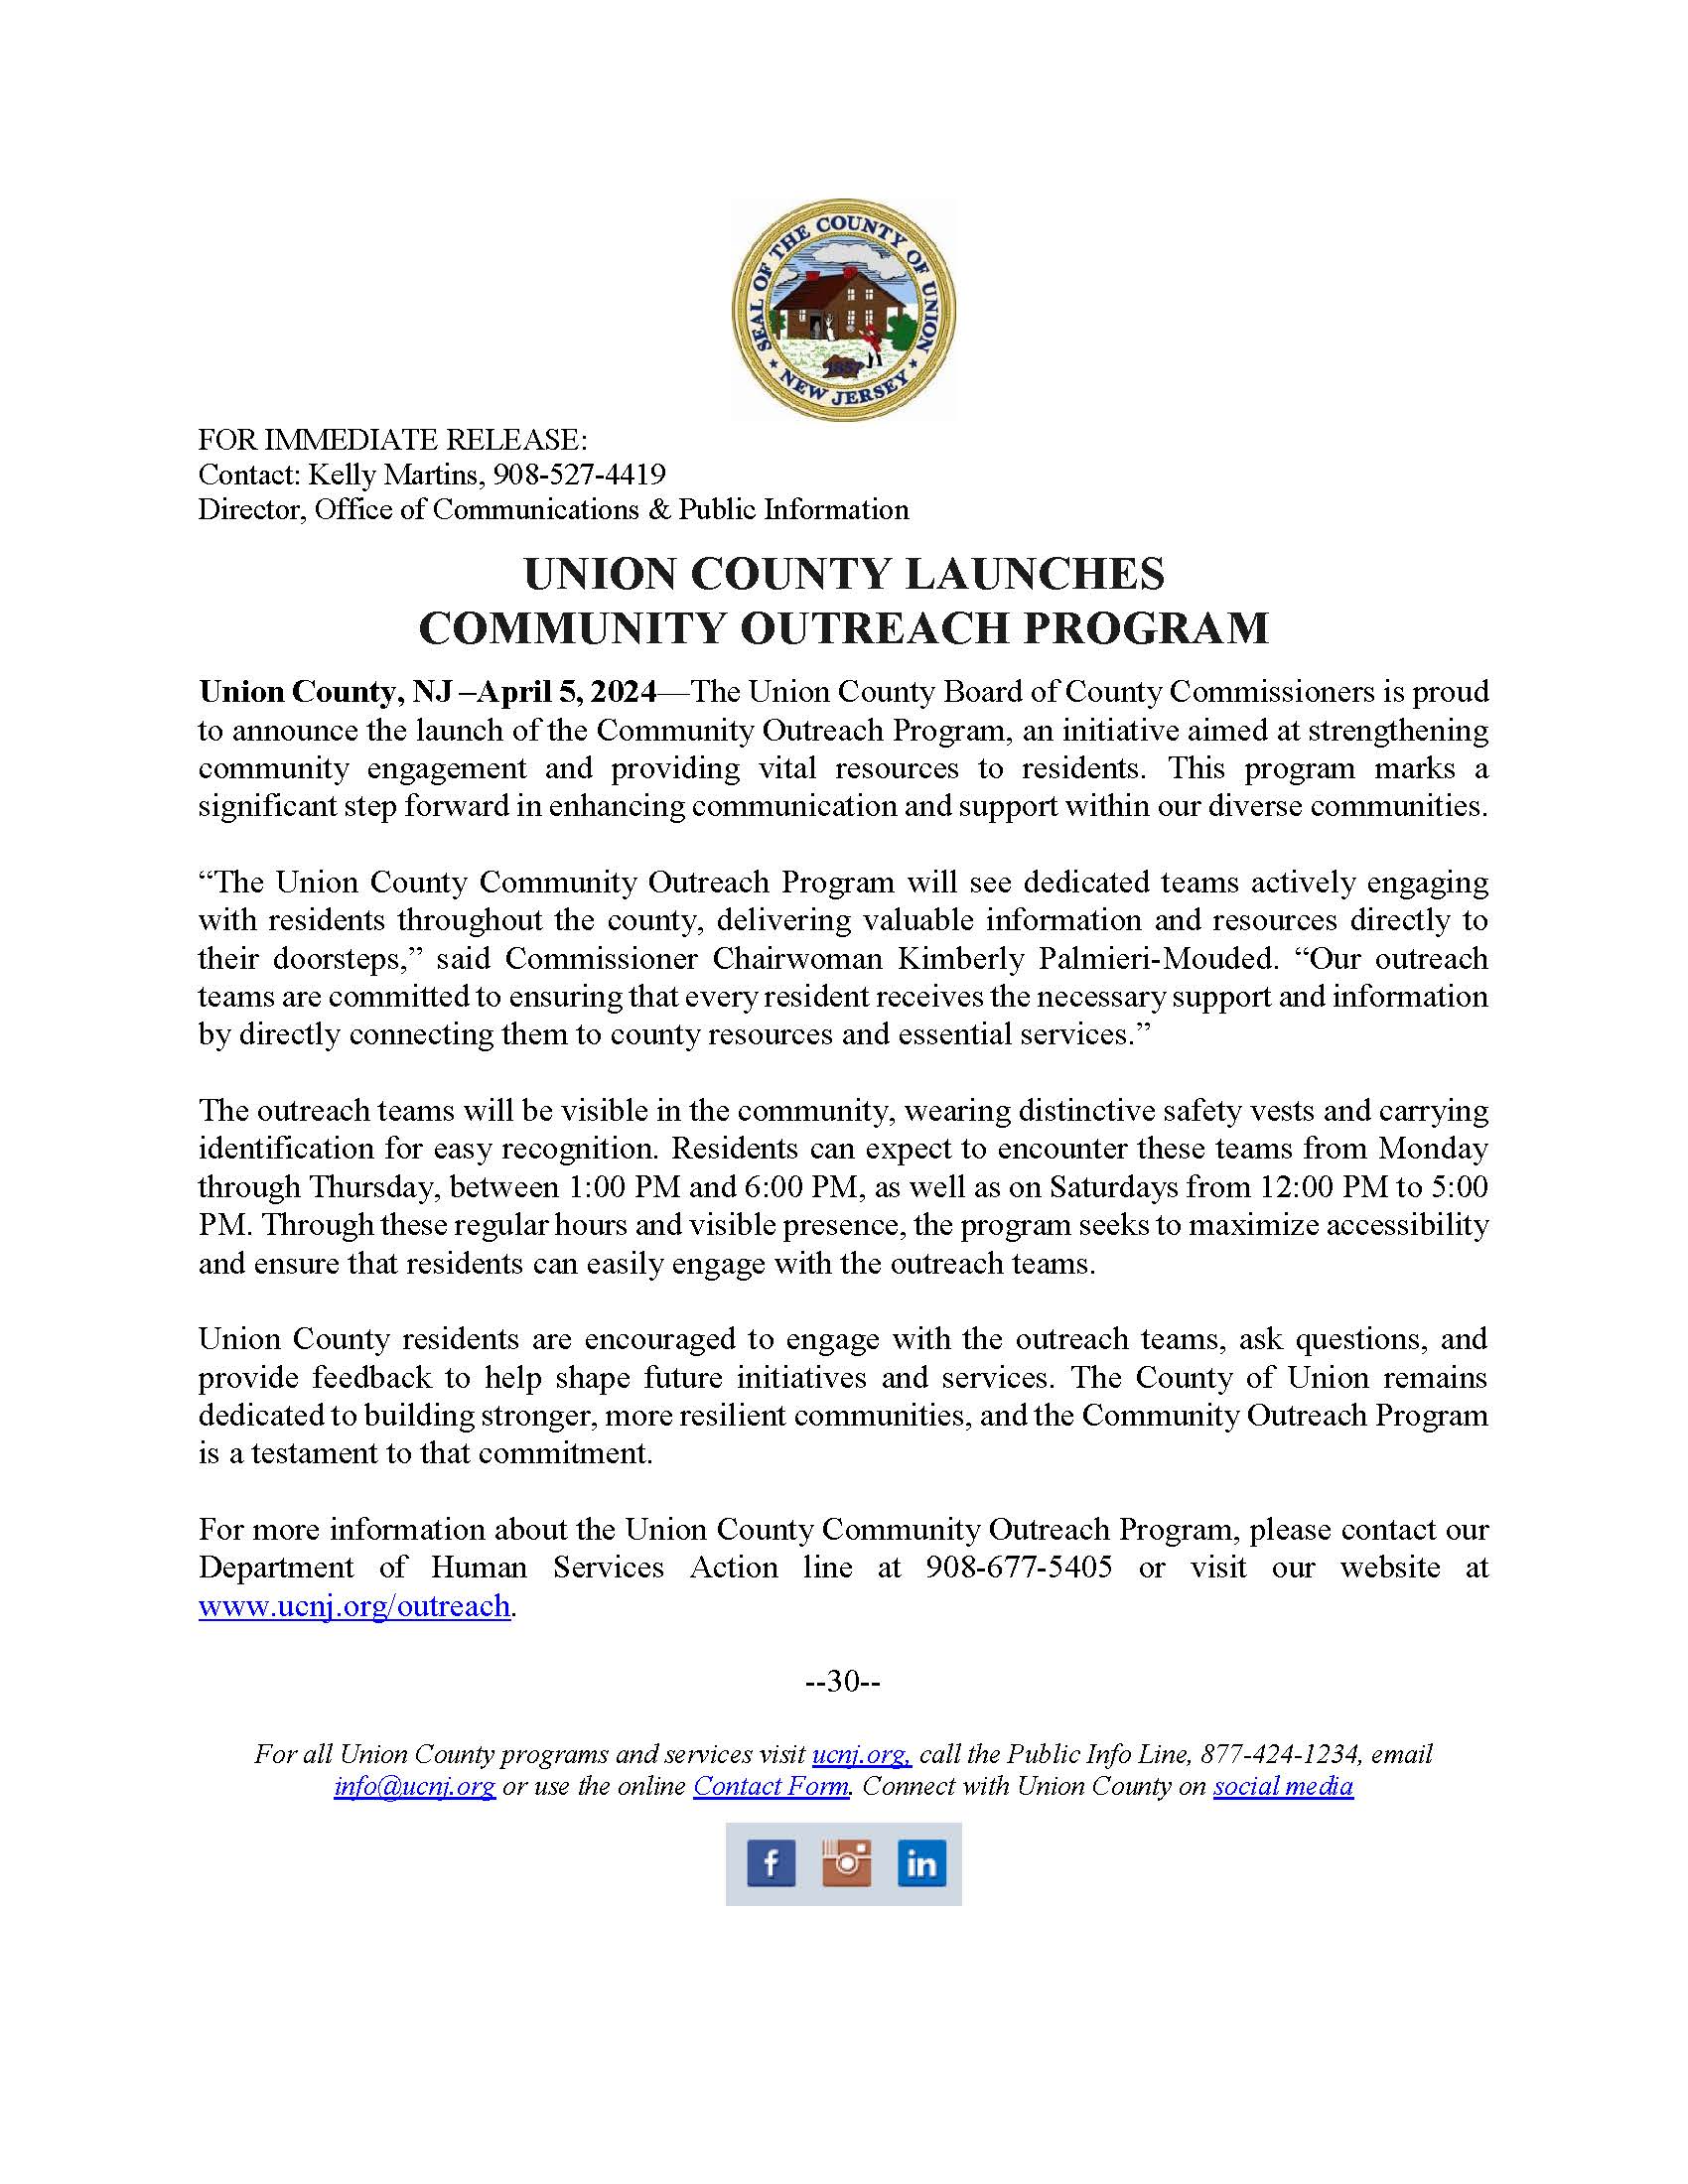 UNION COUNTY LAUNCHES COMMUNITY OUTREACH PROGRAM